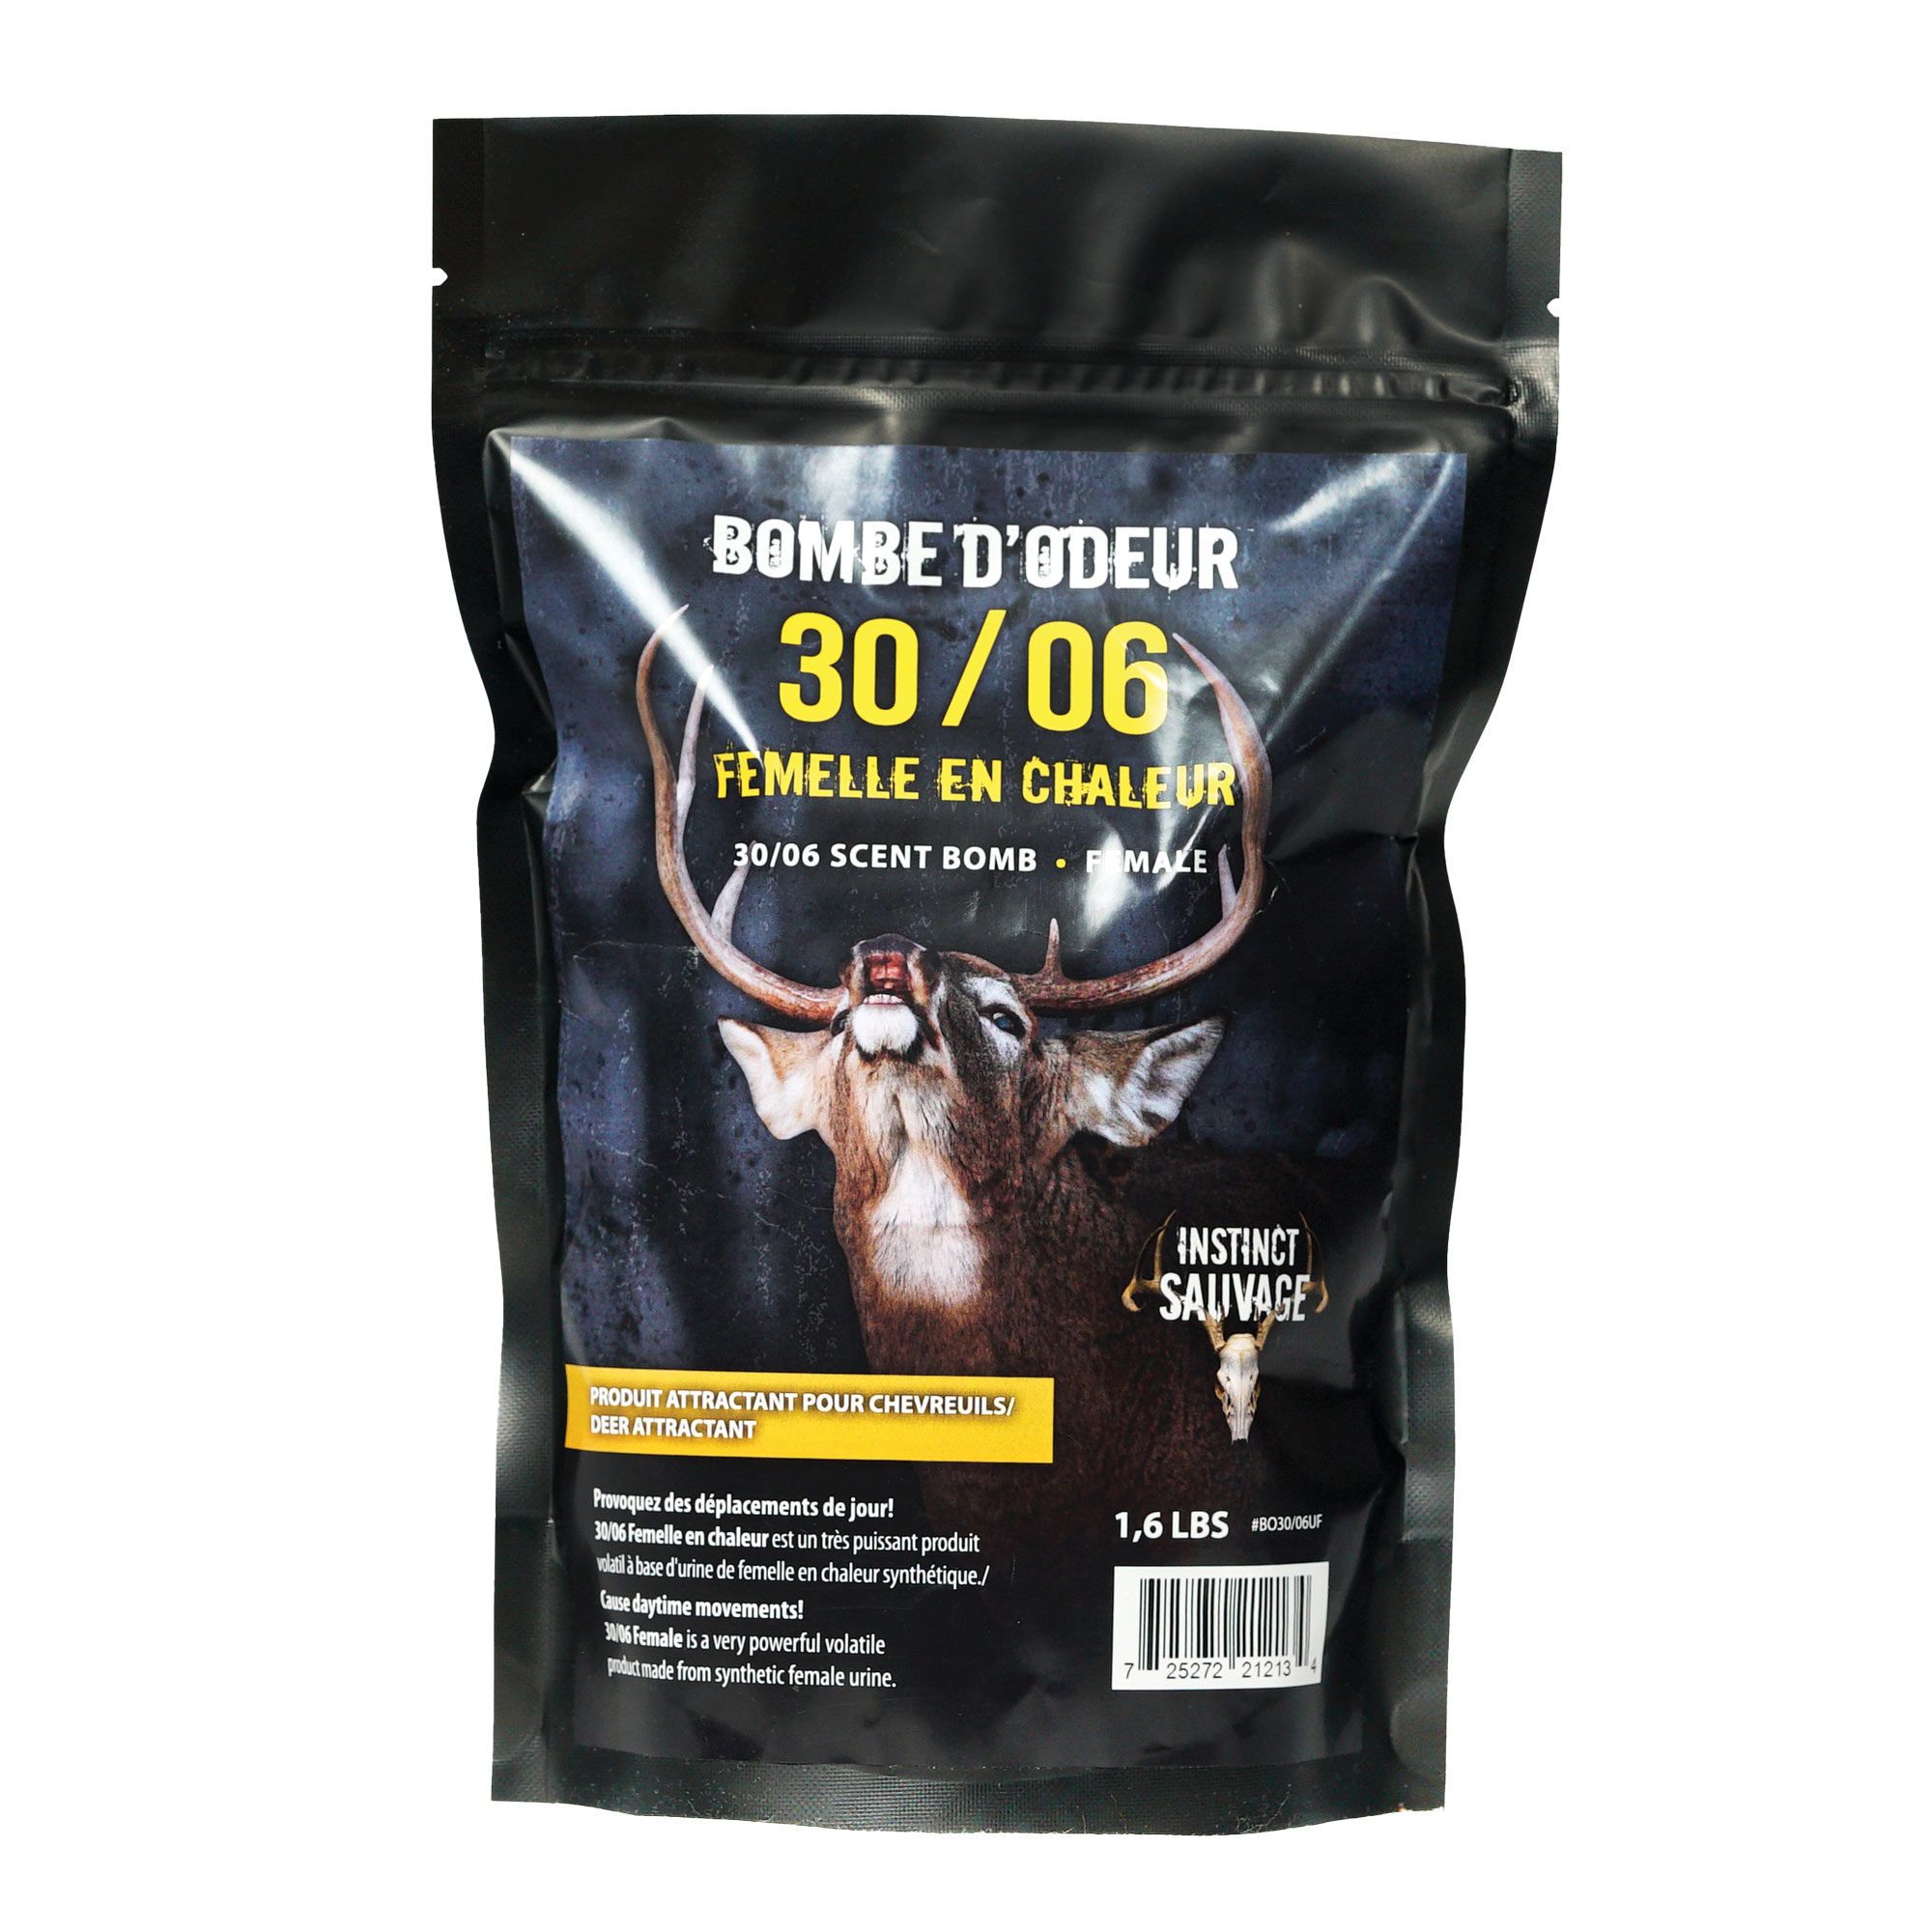 30/06 Deer Lure Scent Bomb - Female Scent - 1.6 lb from INSTINCT SAUVAGE